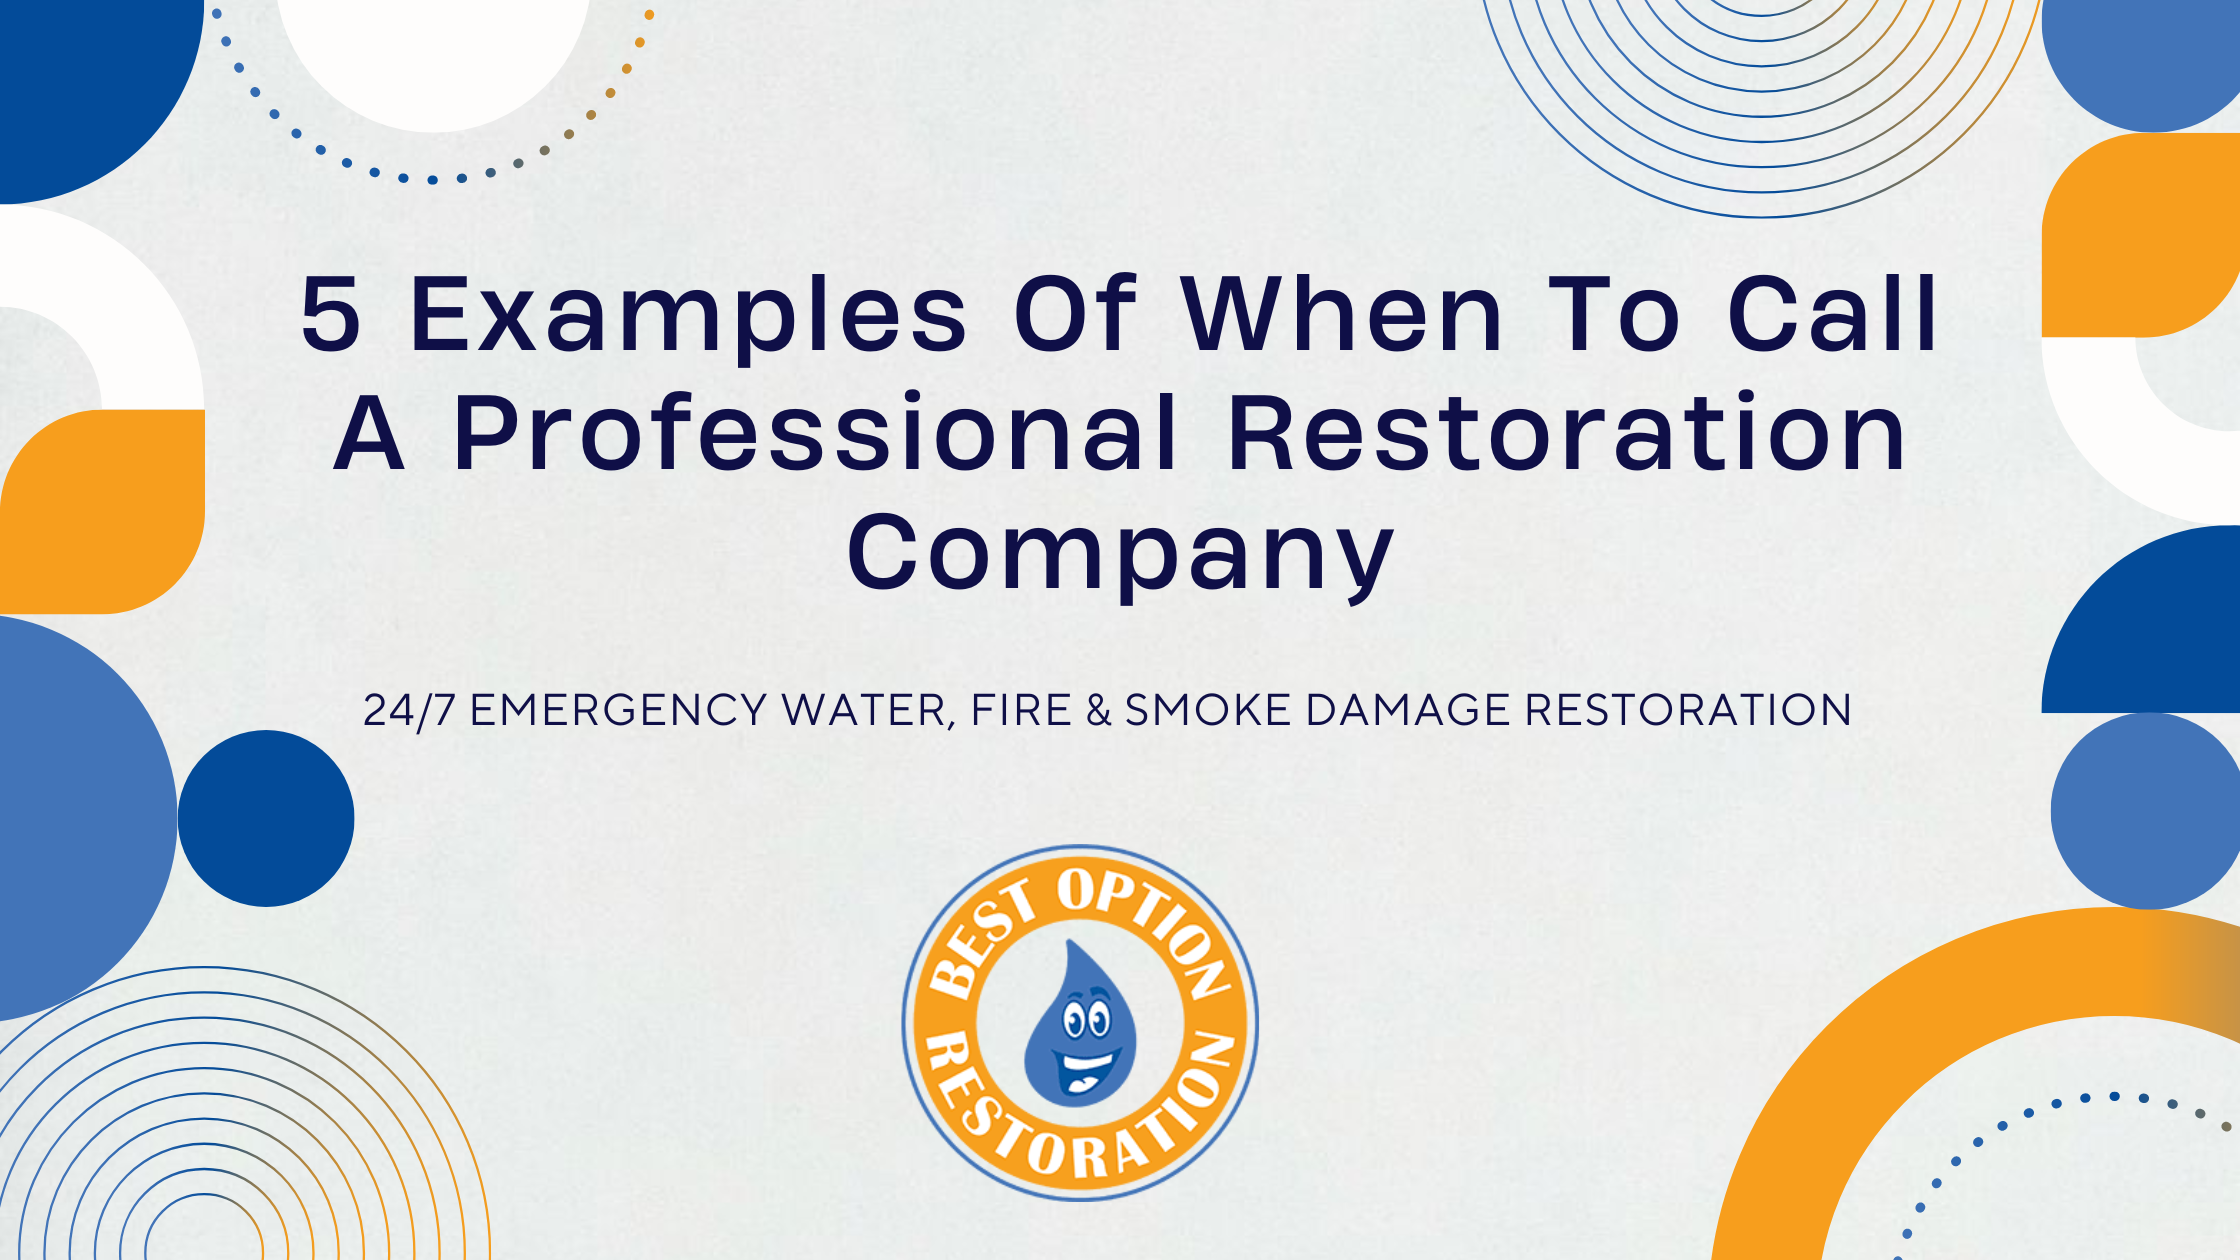 When Disaster Strikes: 5 Critical Moments to Call a Restoration Company